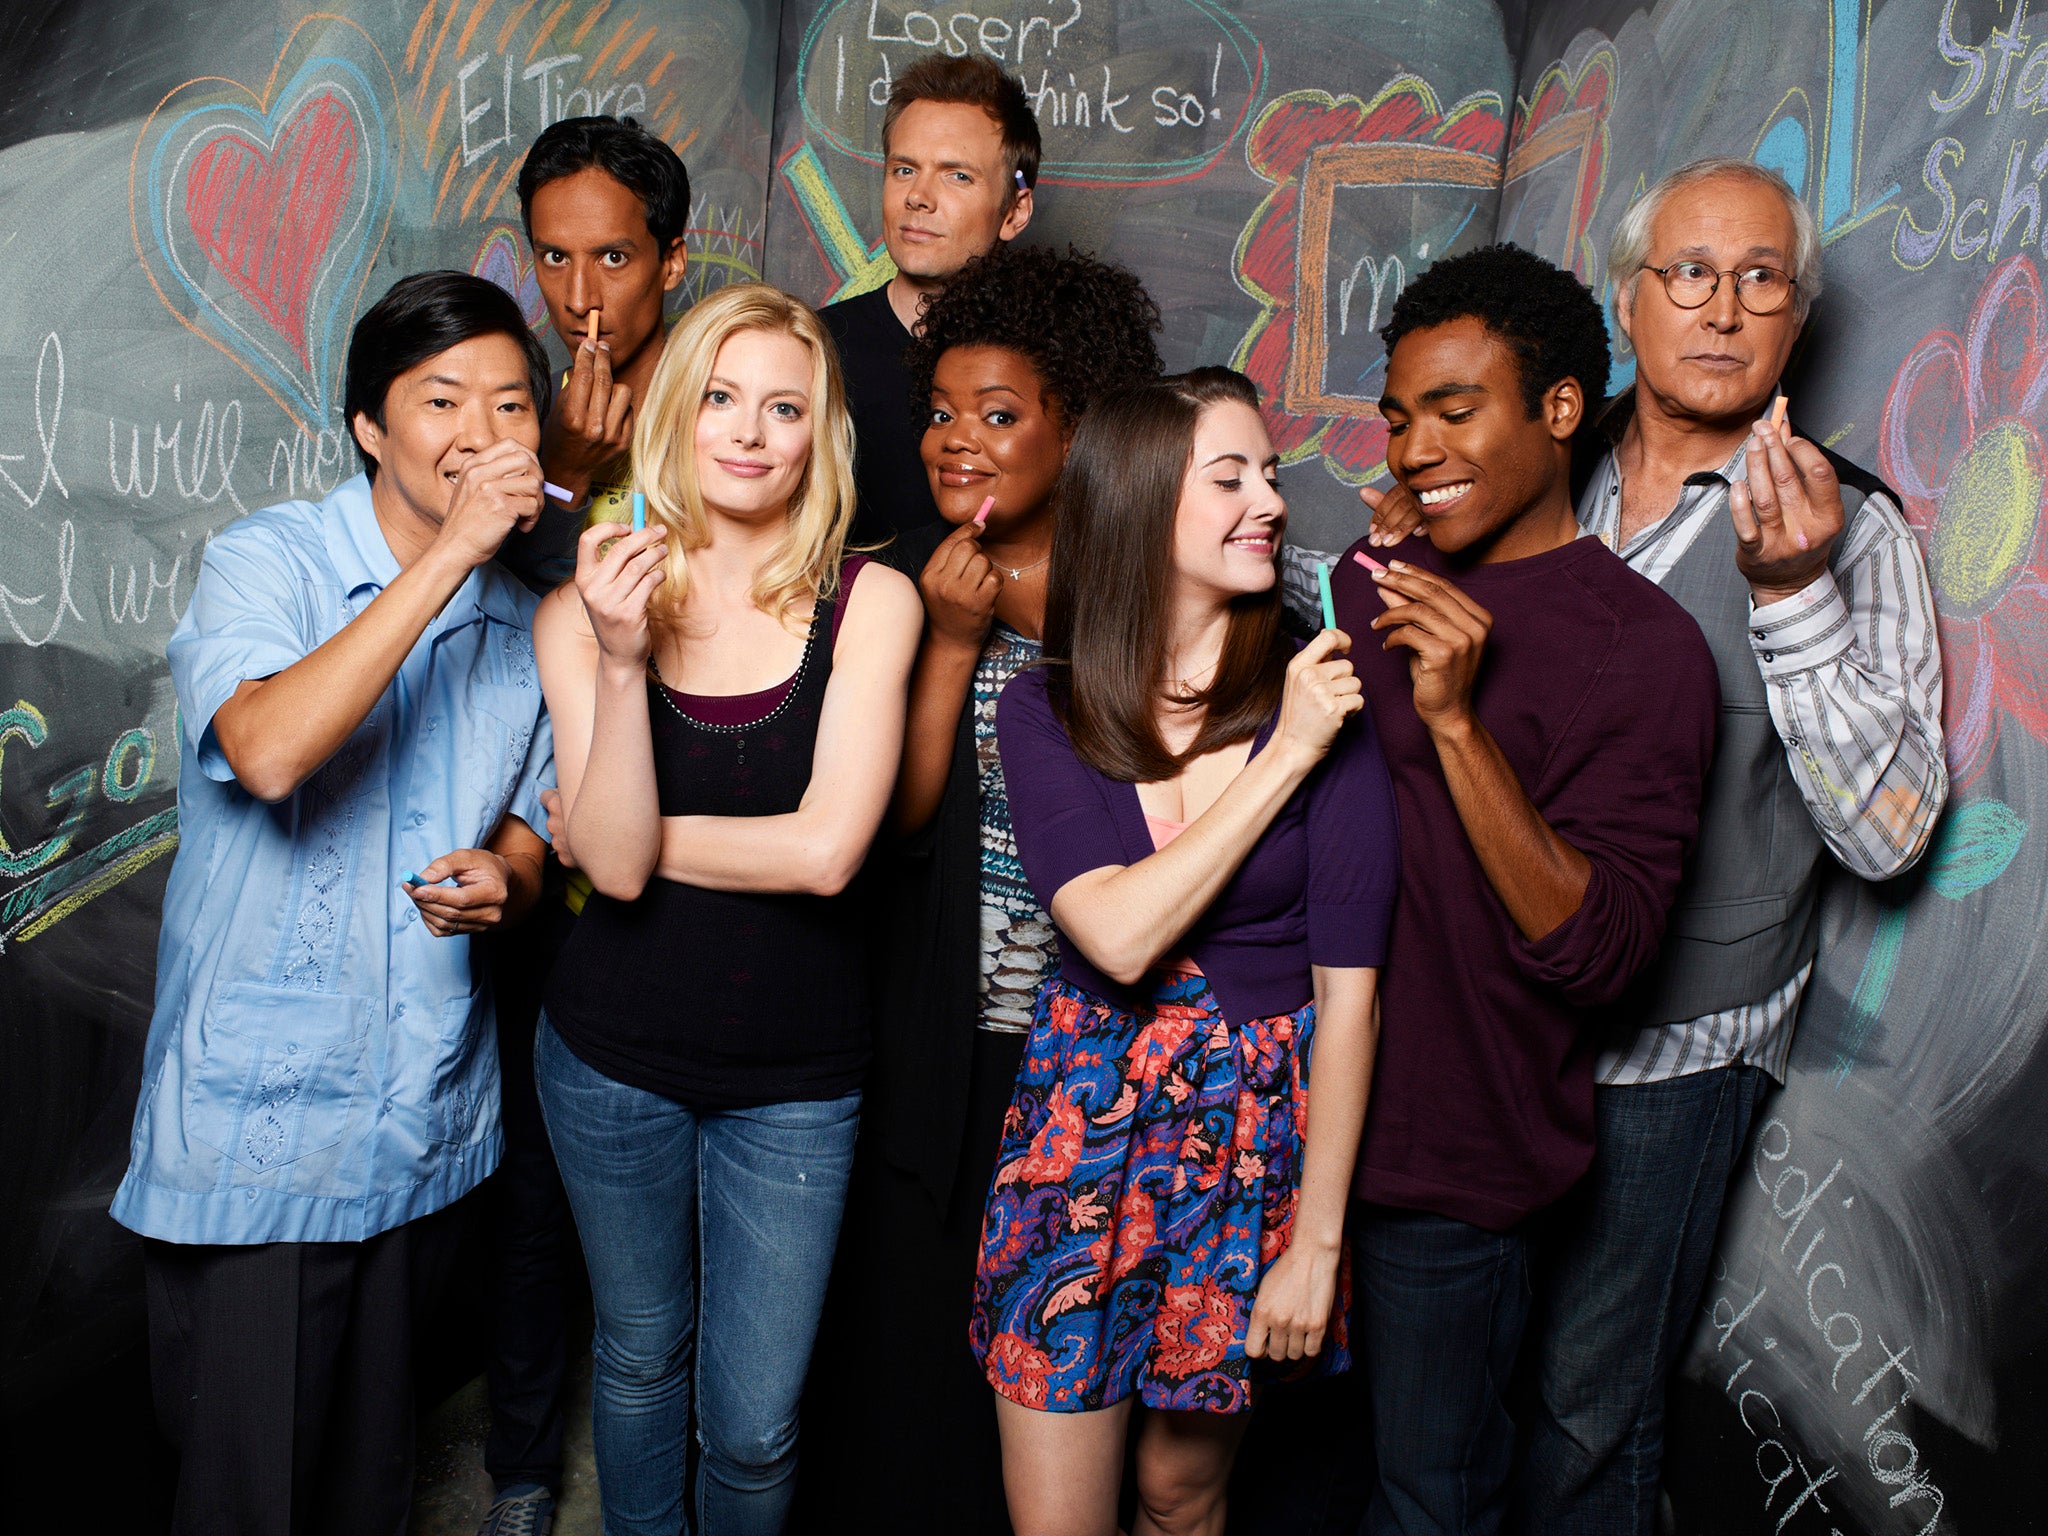 Community is back: Celebrating the return of a sitcom thatâ€™s in a class ...